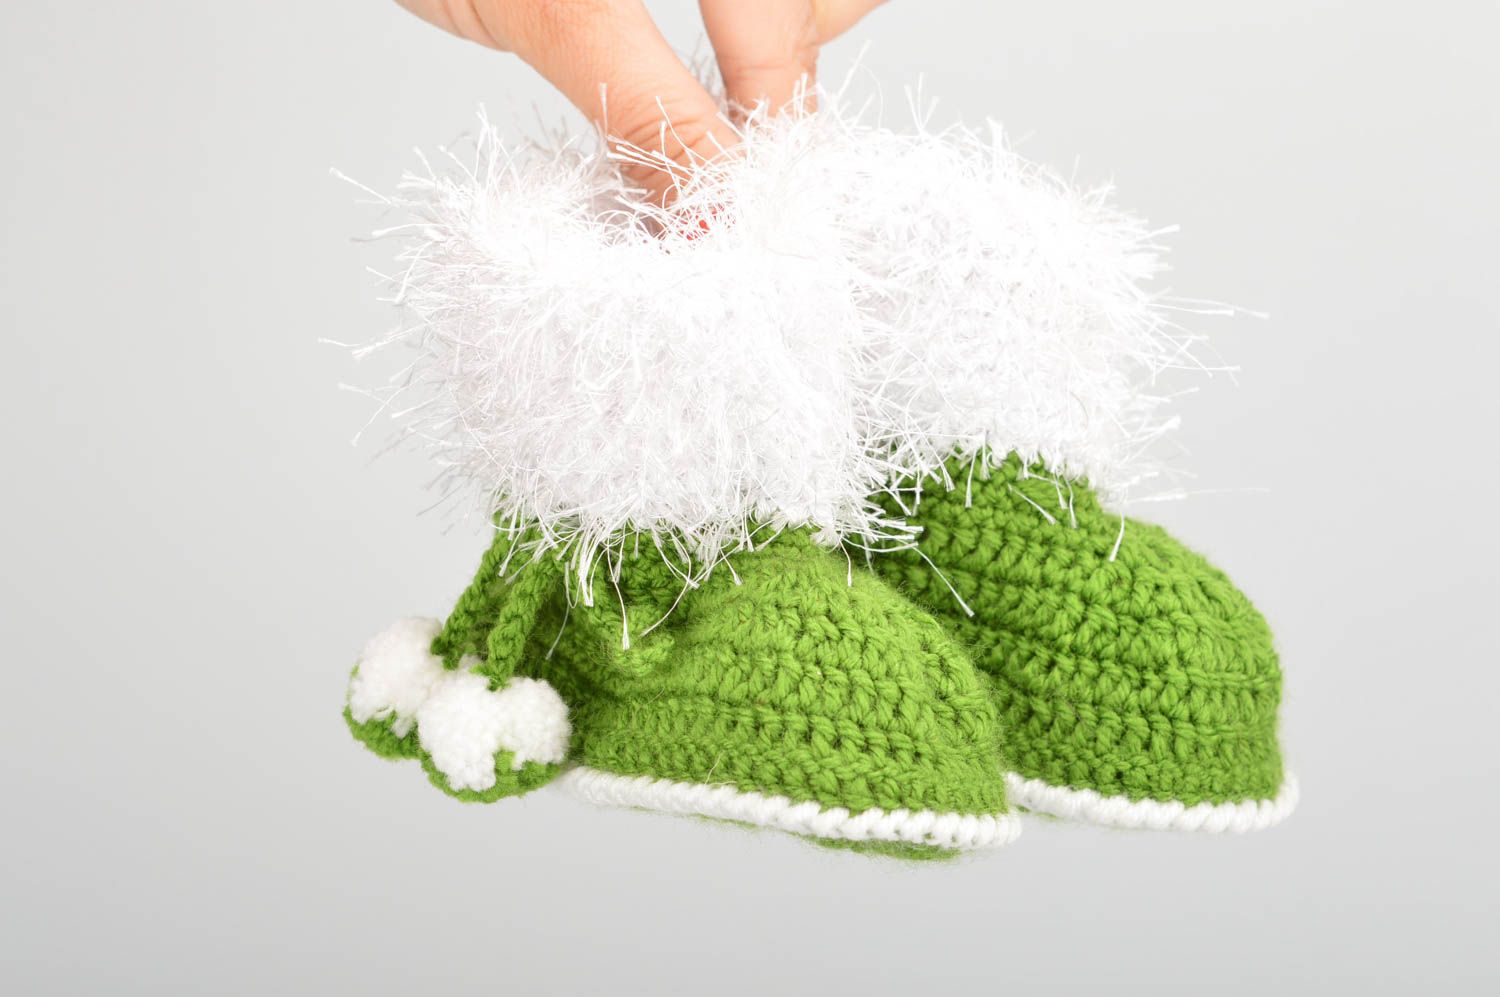 Crocheted designer cute green handmade baby bootees made of acrylics for boys photo 3